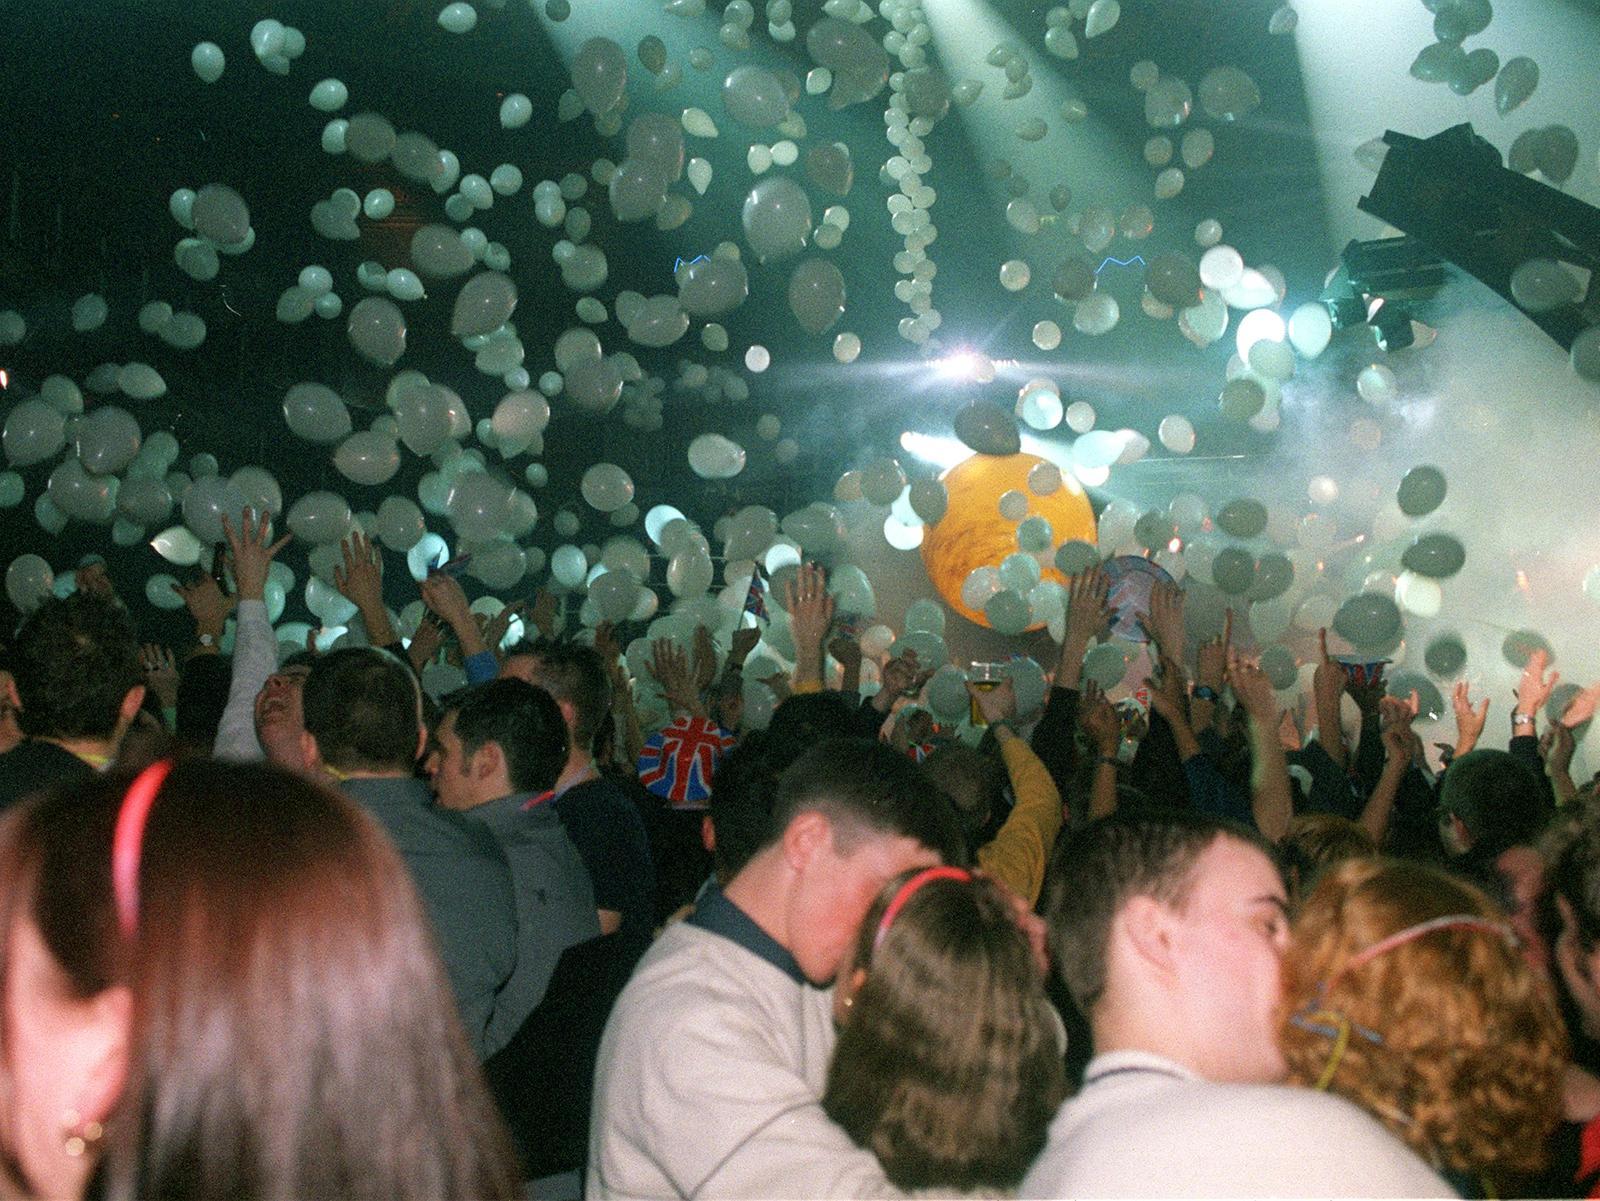 Couples embrace on the dance floor as hundreds of balloons are released.